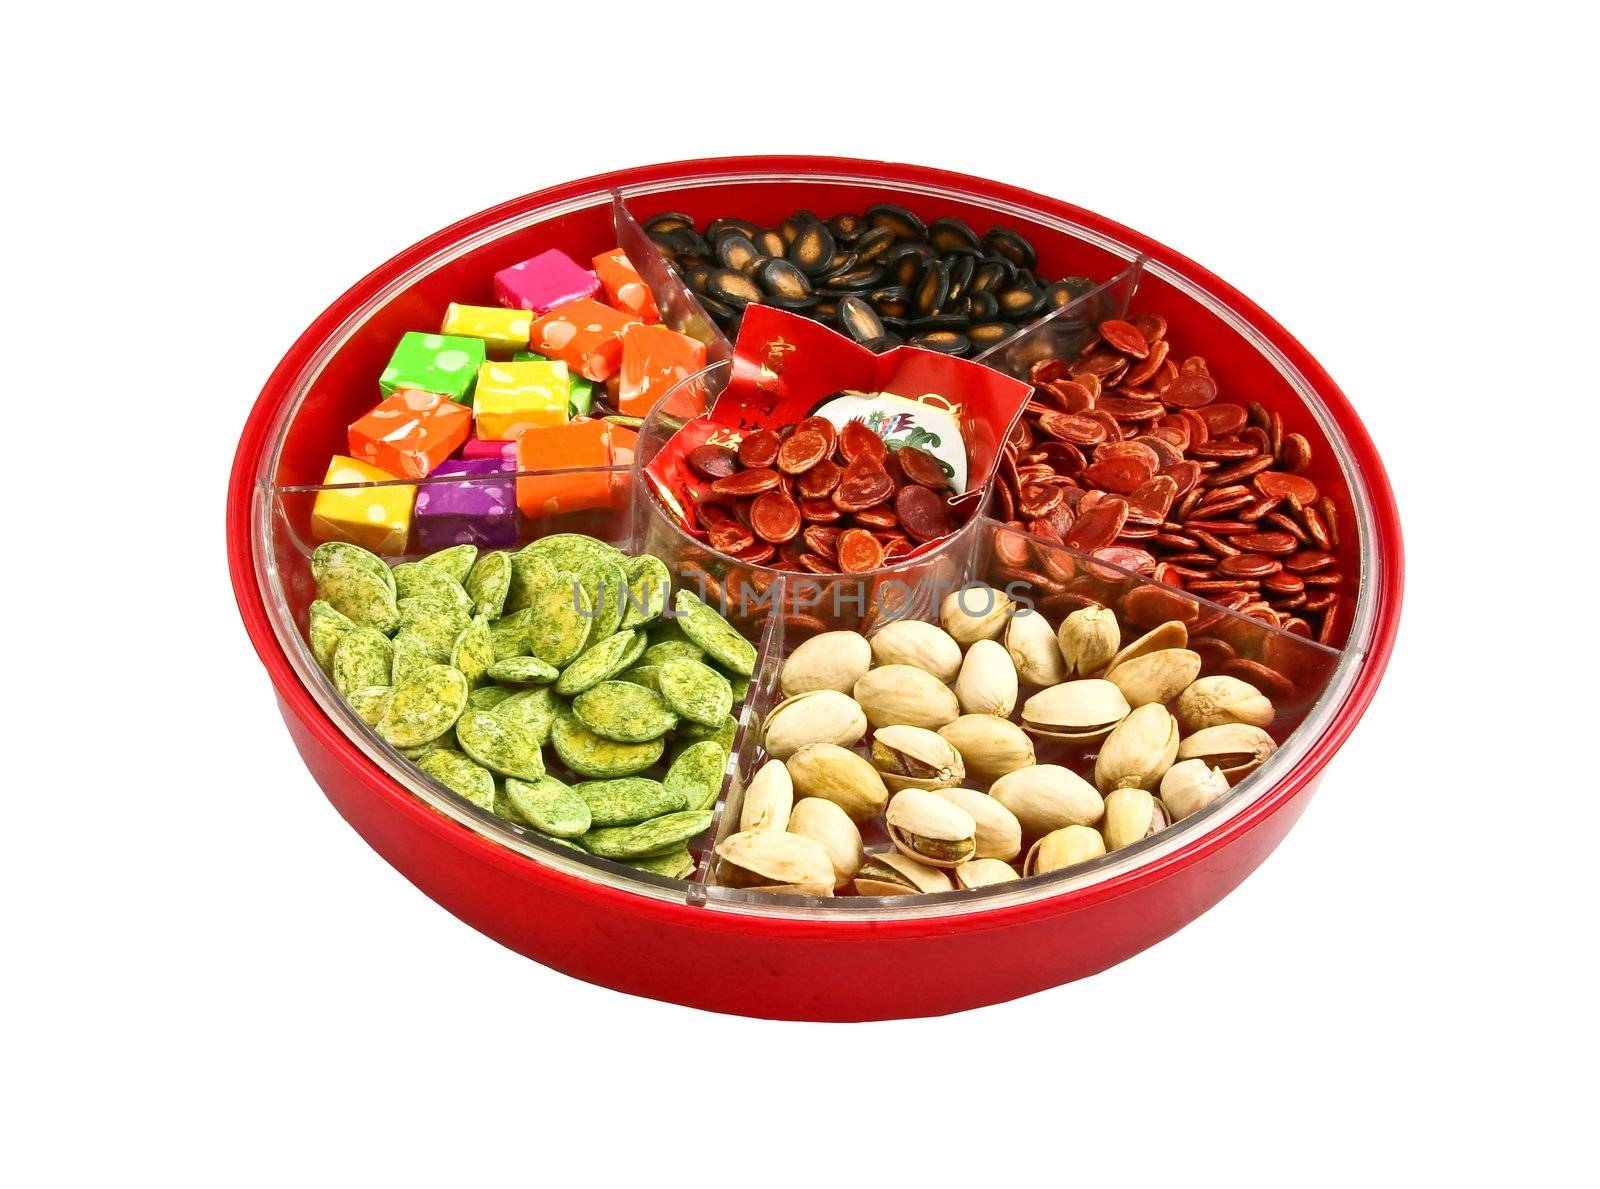 A top view of Chinese candy box. It is used for Chinese New Year, it consists different kinds of candies, chocolate coins, melon seeds, sugar preserved dried fruits or even dried vegetables.